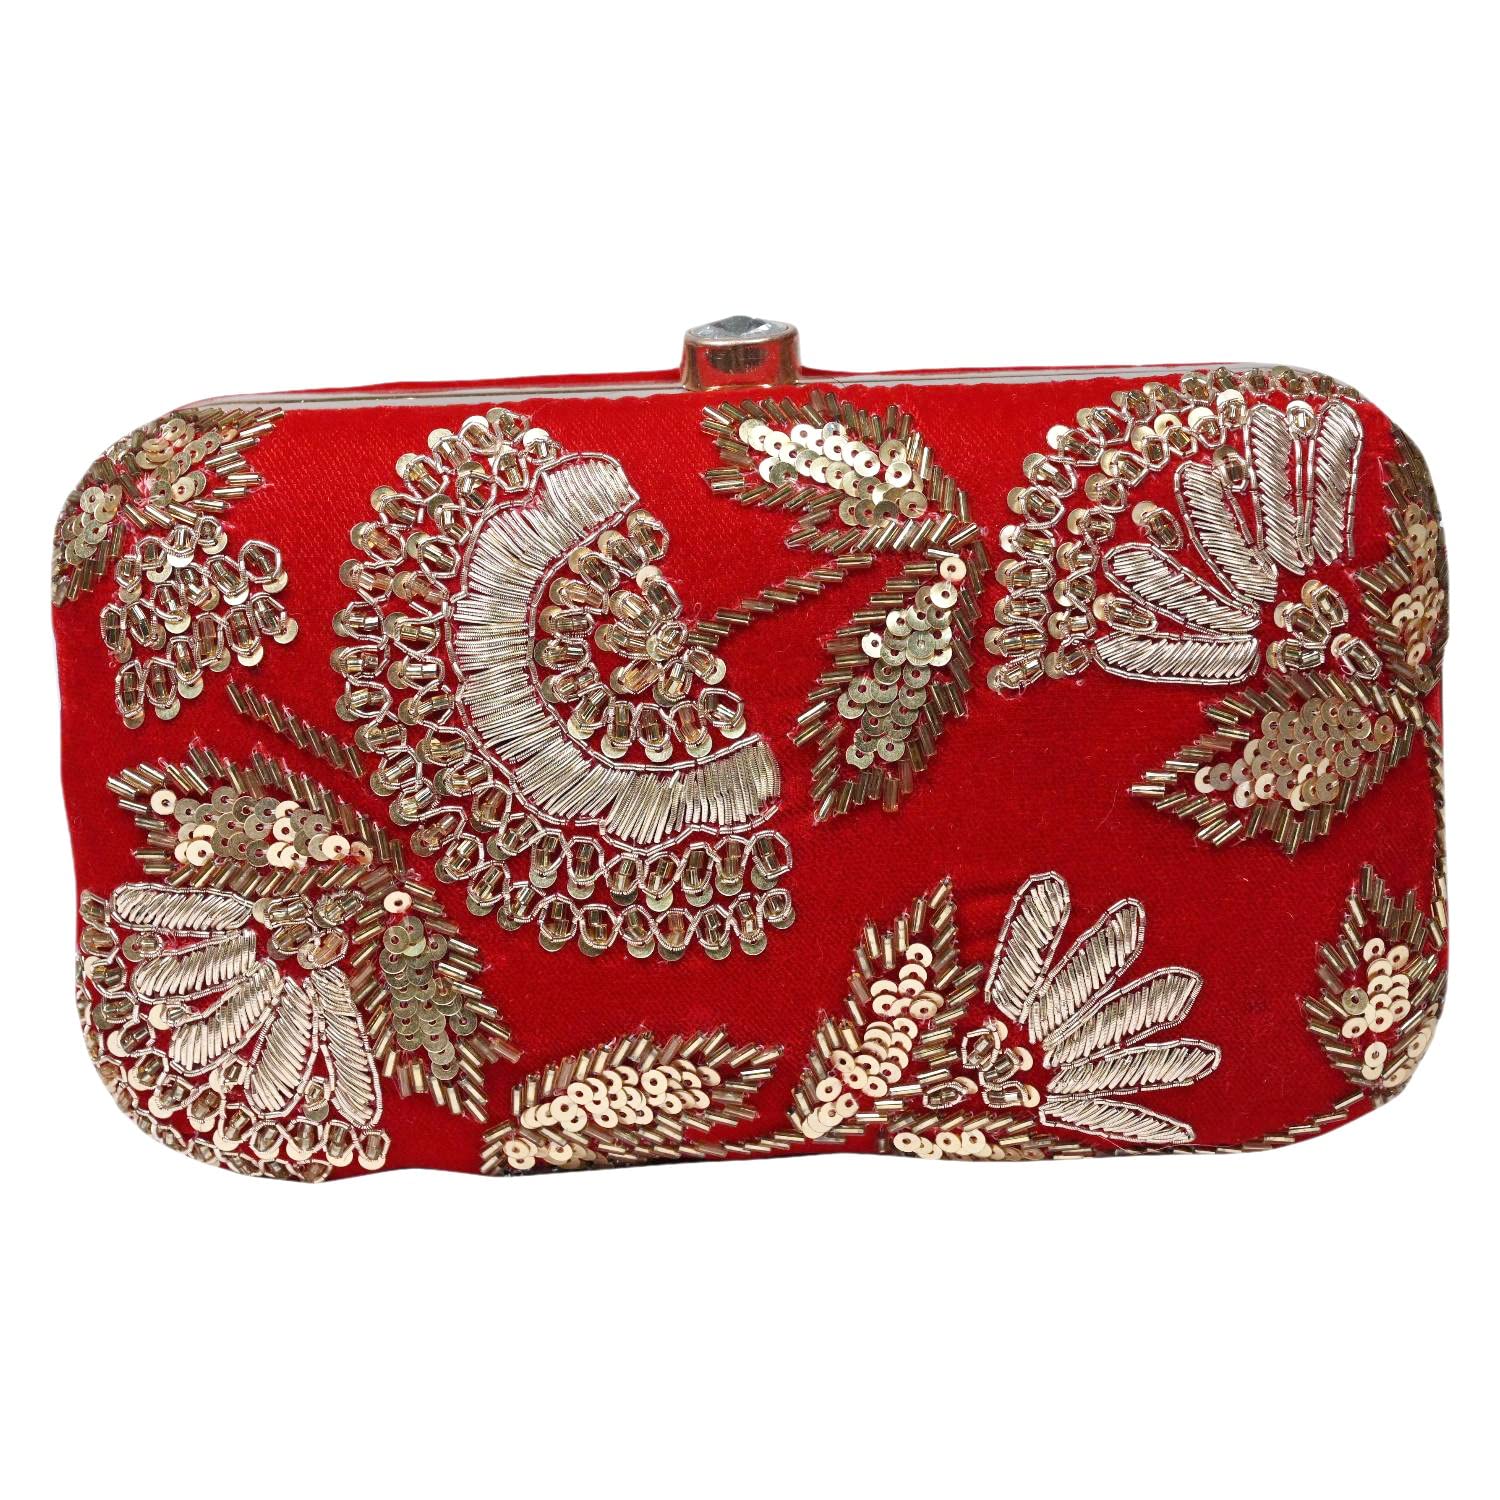 FALAH HANDICRAFTS SOCIETY FHS Red Ethnic Party Wear Clutch